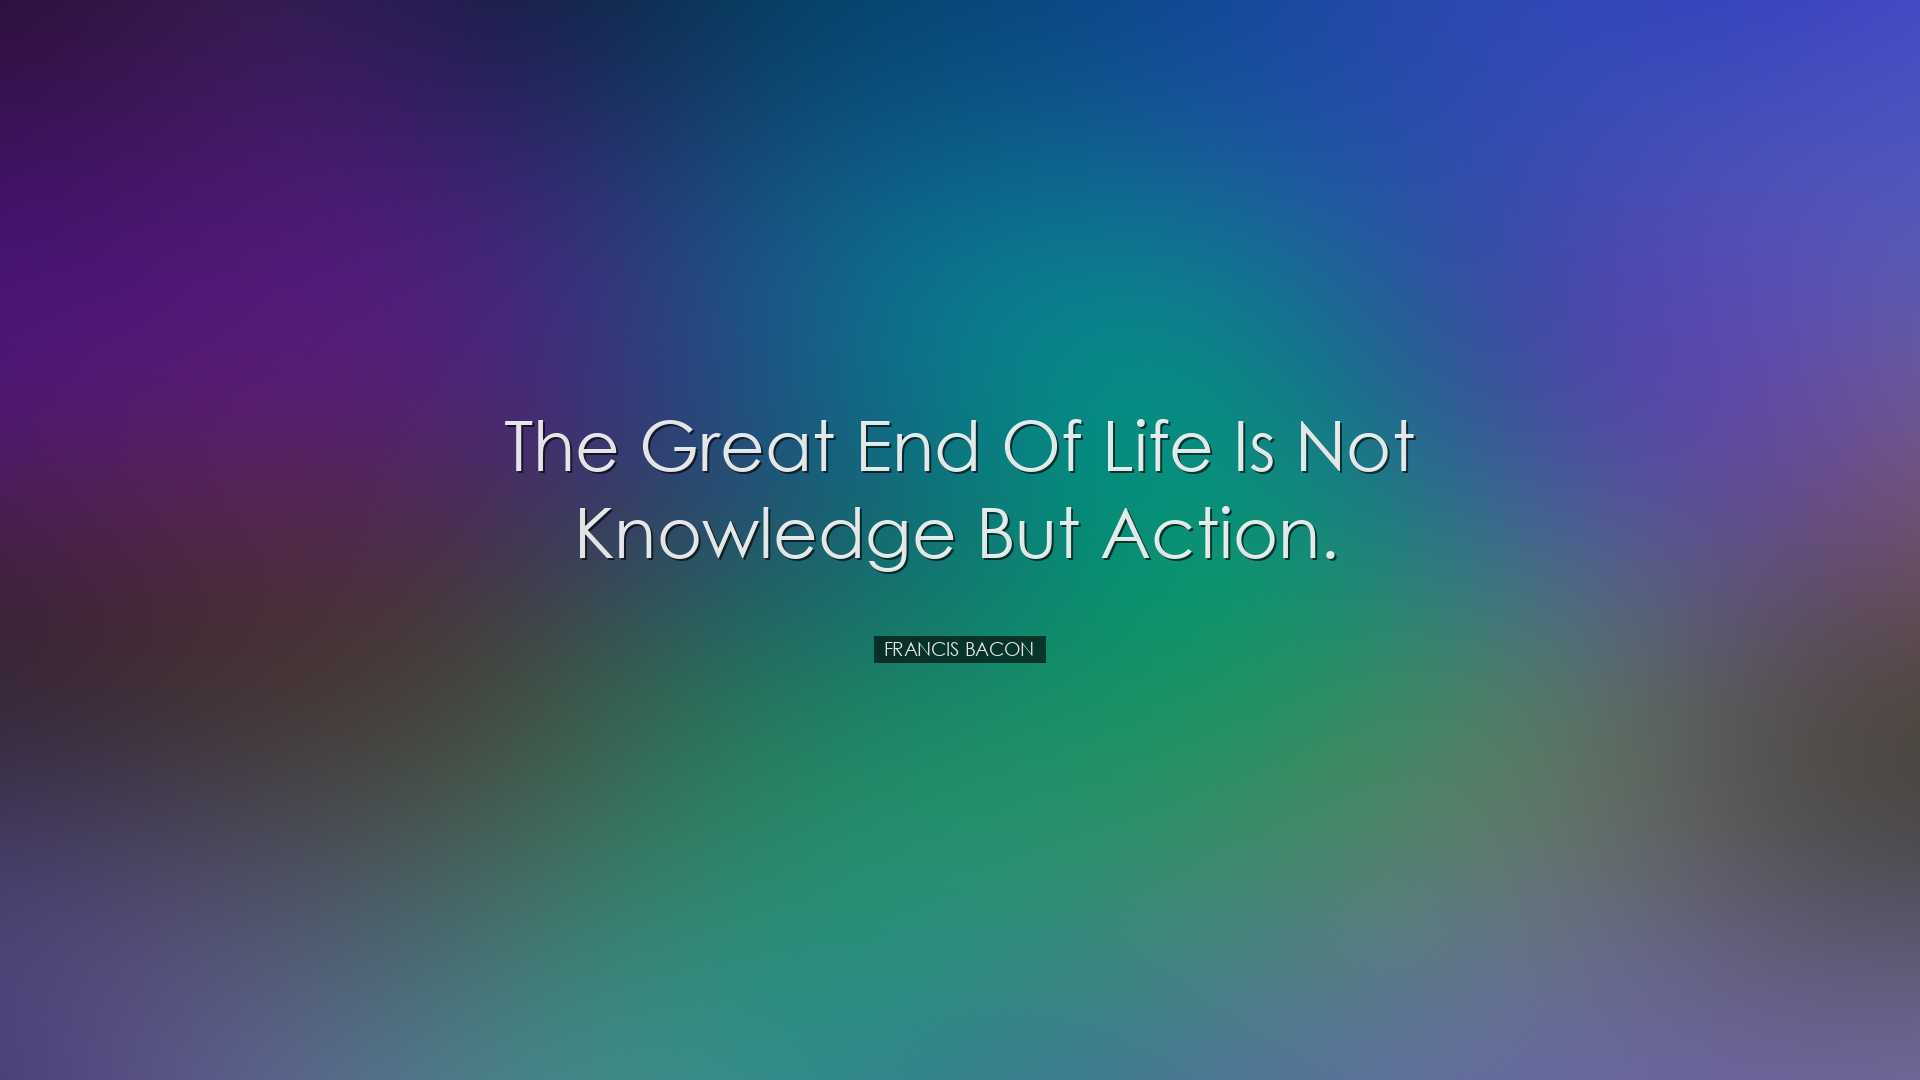 The great end of life is not knowledge but action. - Francis Bacon